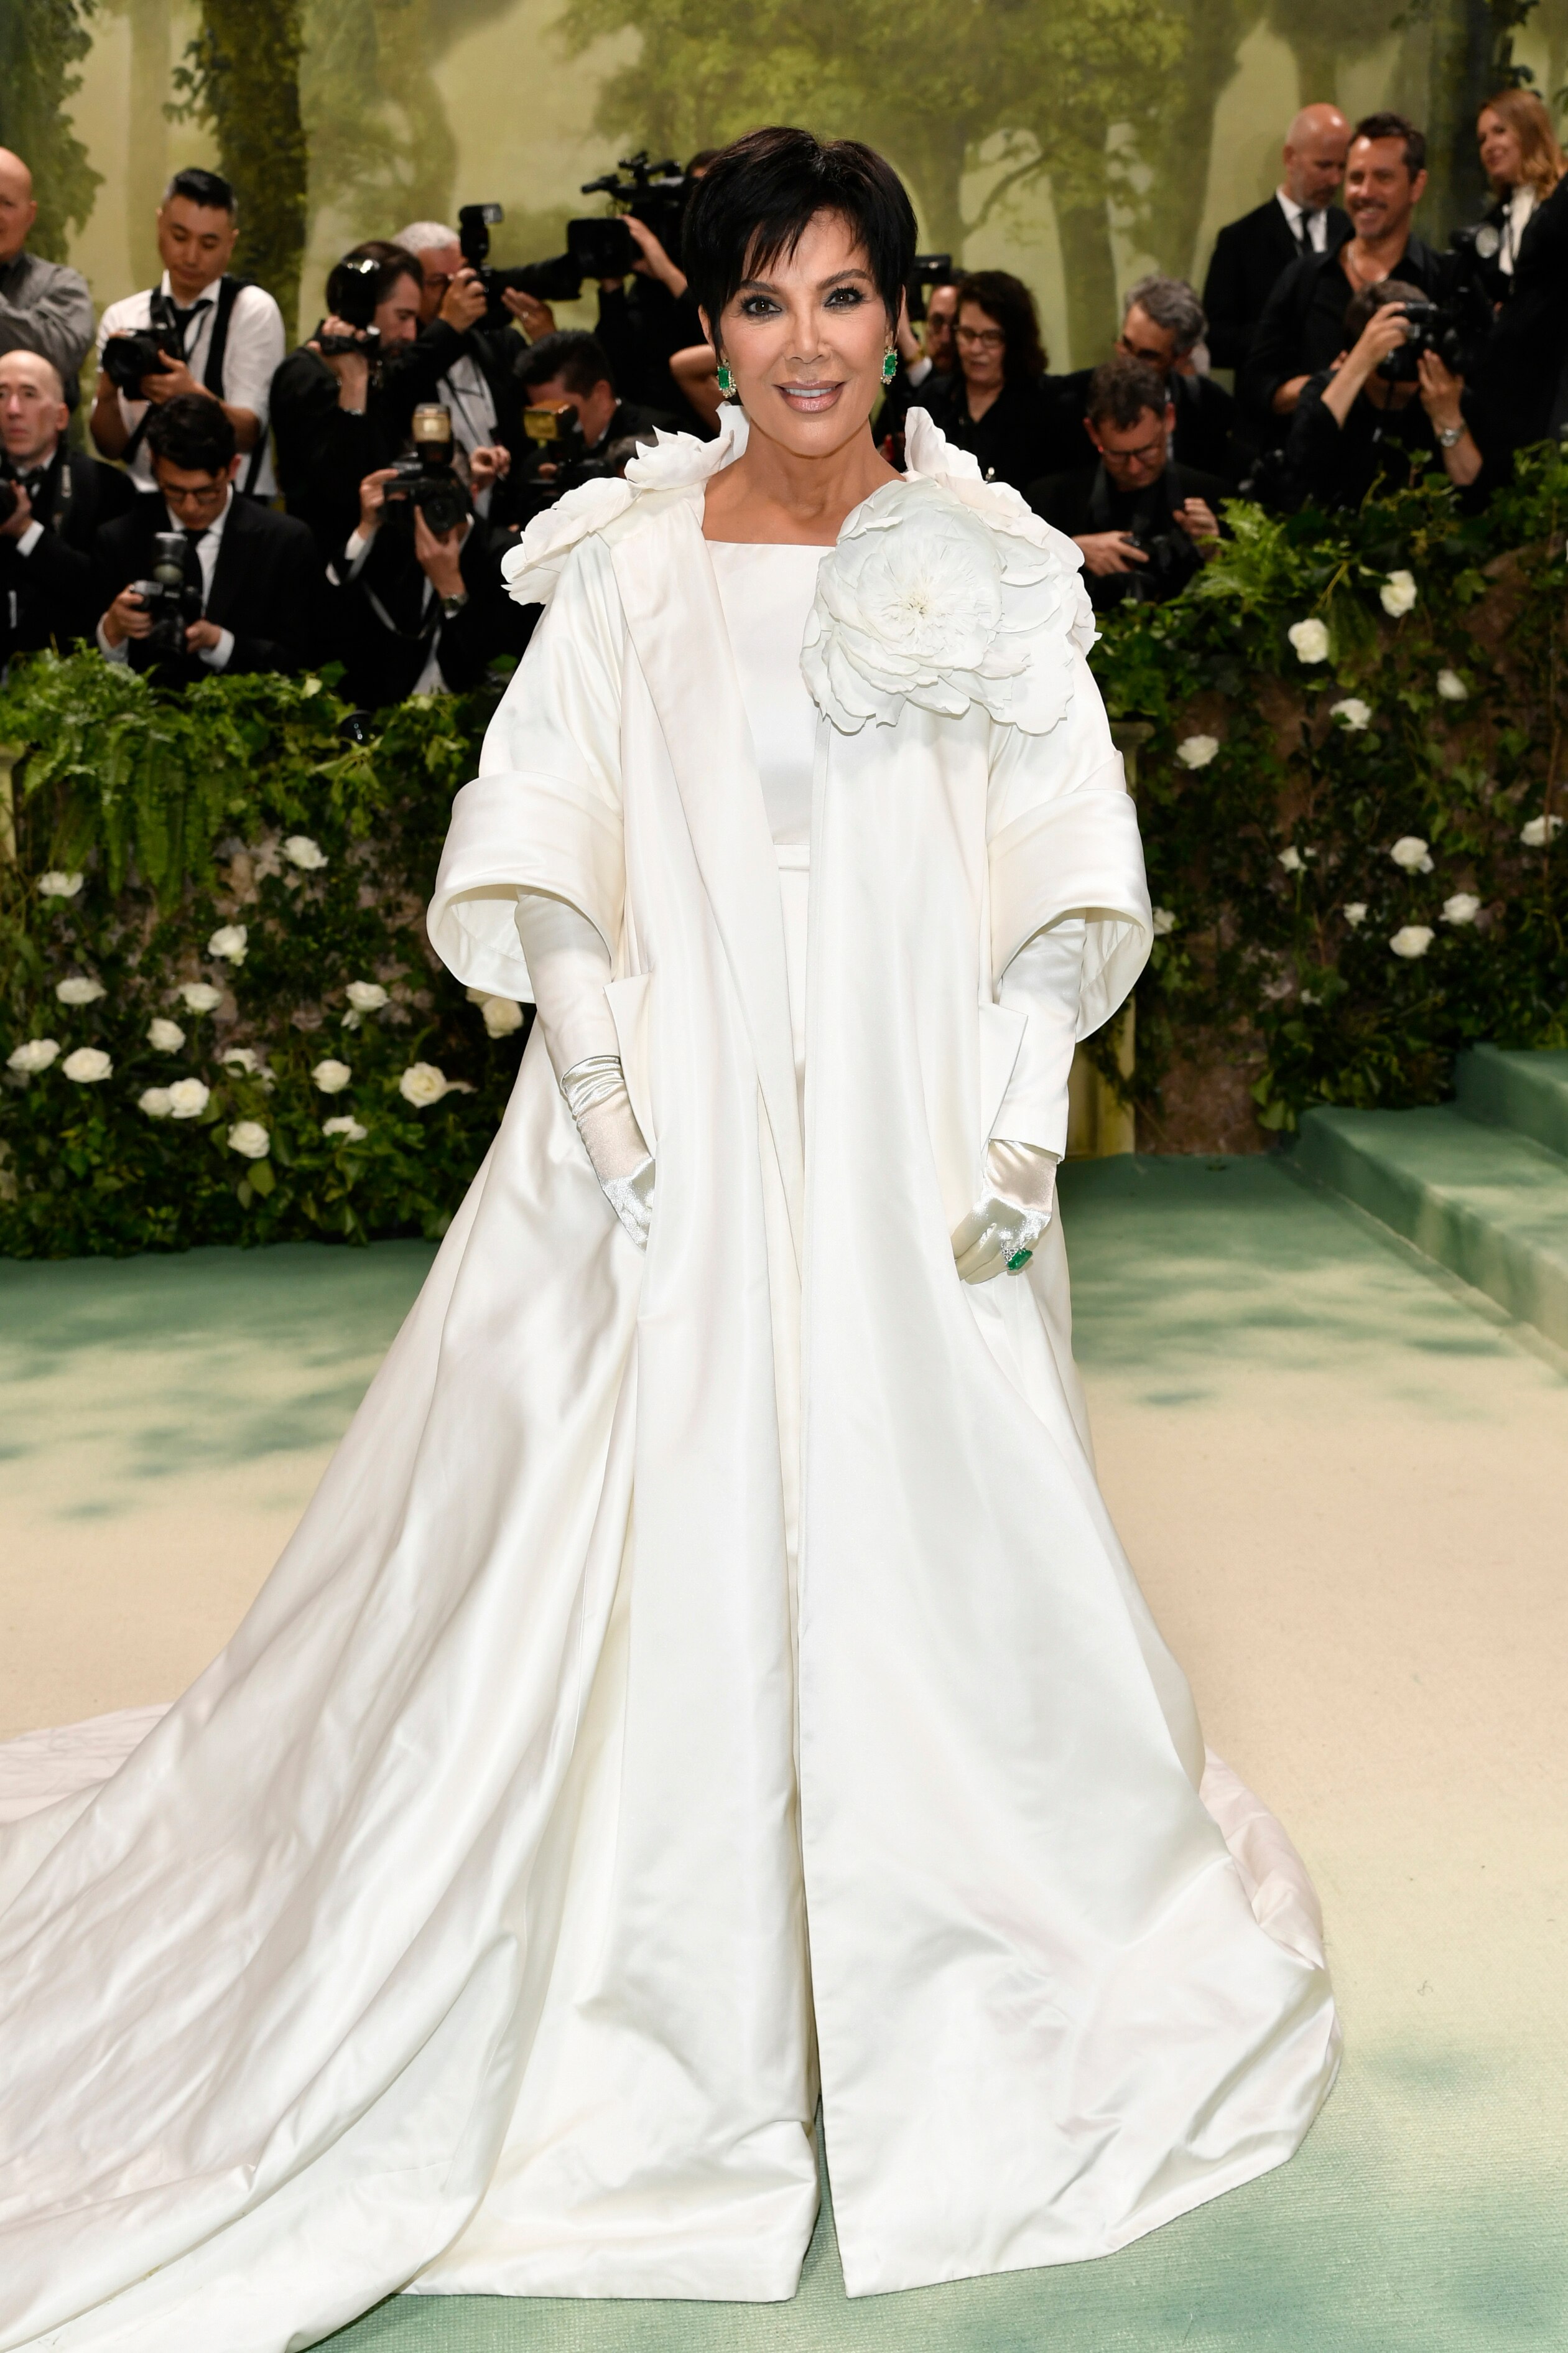 Kris Jenner wearing a long white coat with flowers on the shoulders and long white gloves